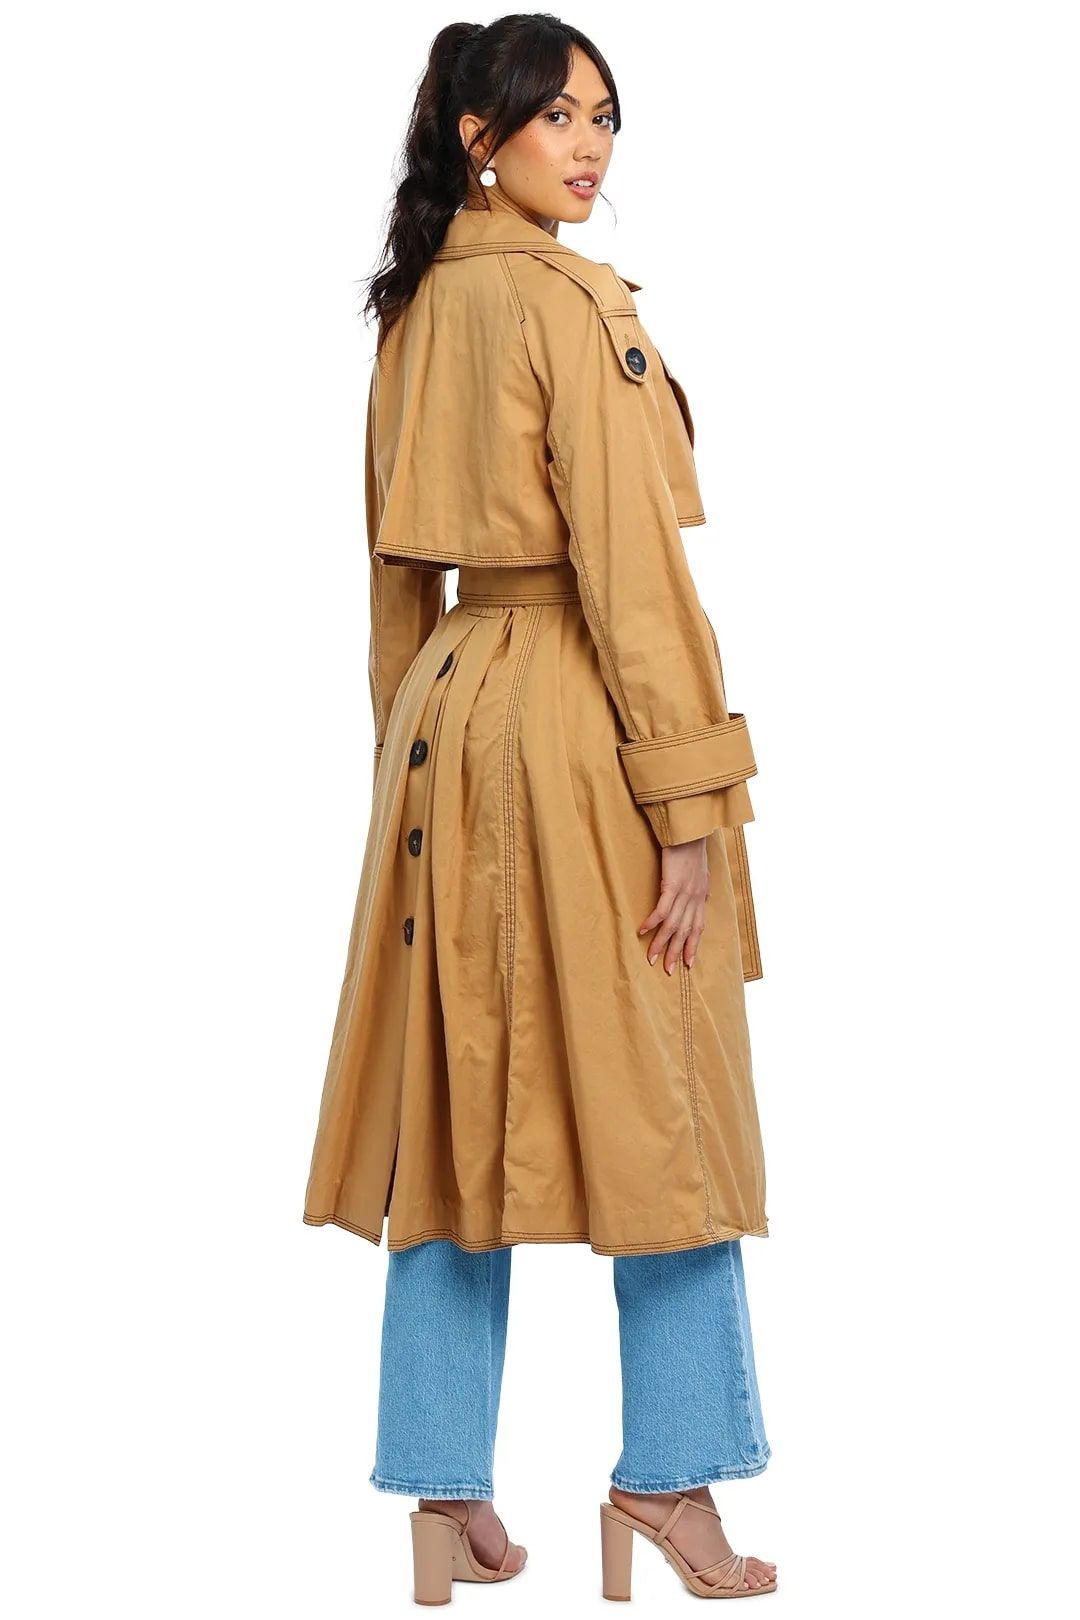 Hire the Acler Saratoga Trench in Biscuit for everyday elegance